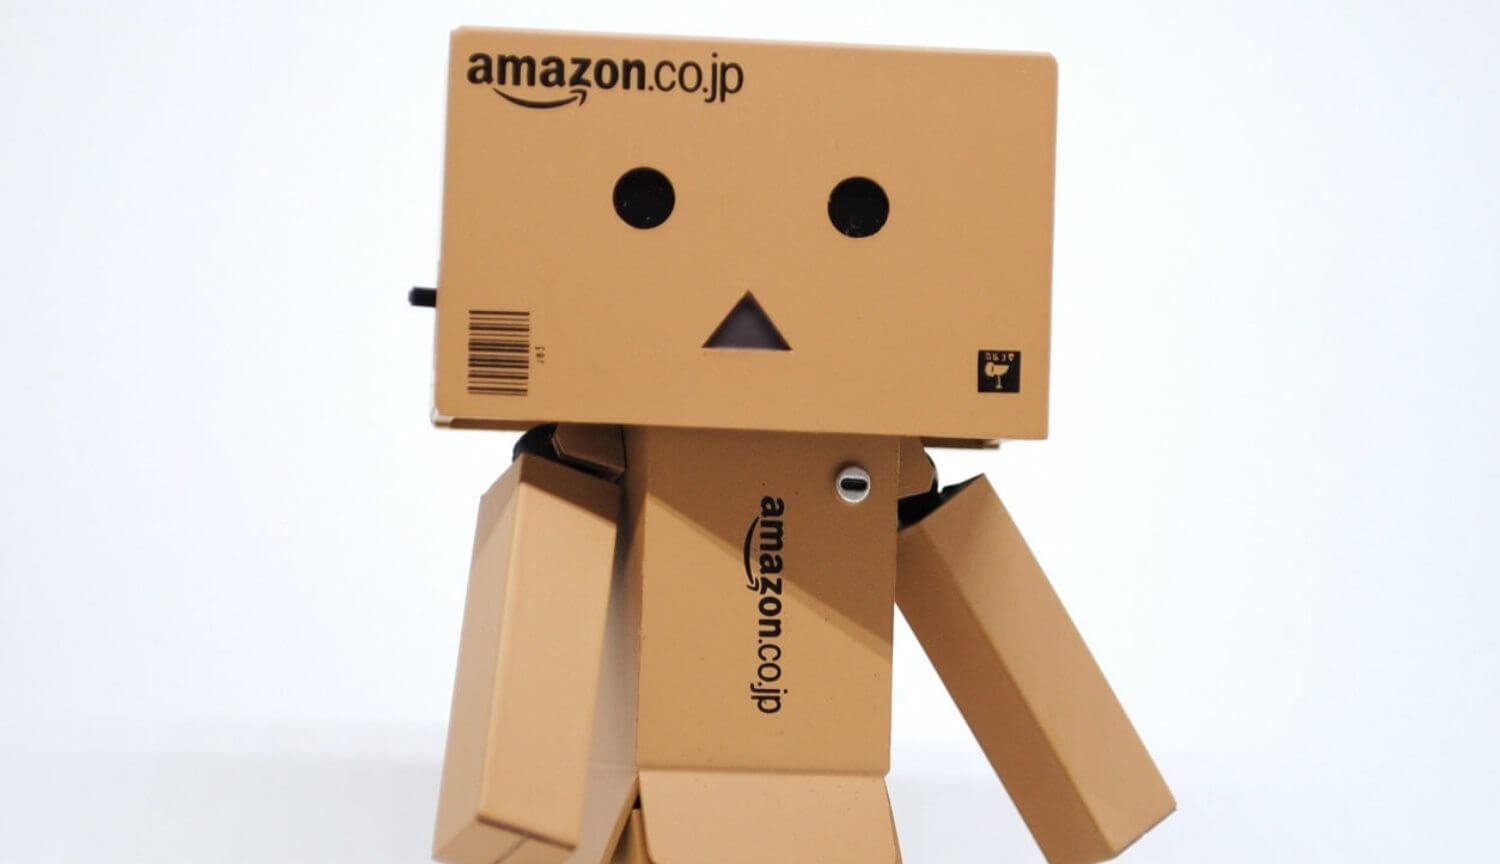 Home robot Amazon the size of a child. What we know about him?